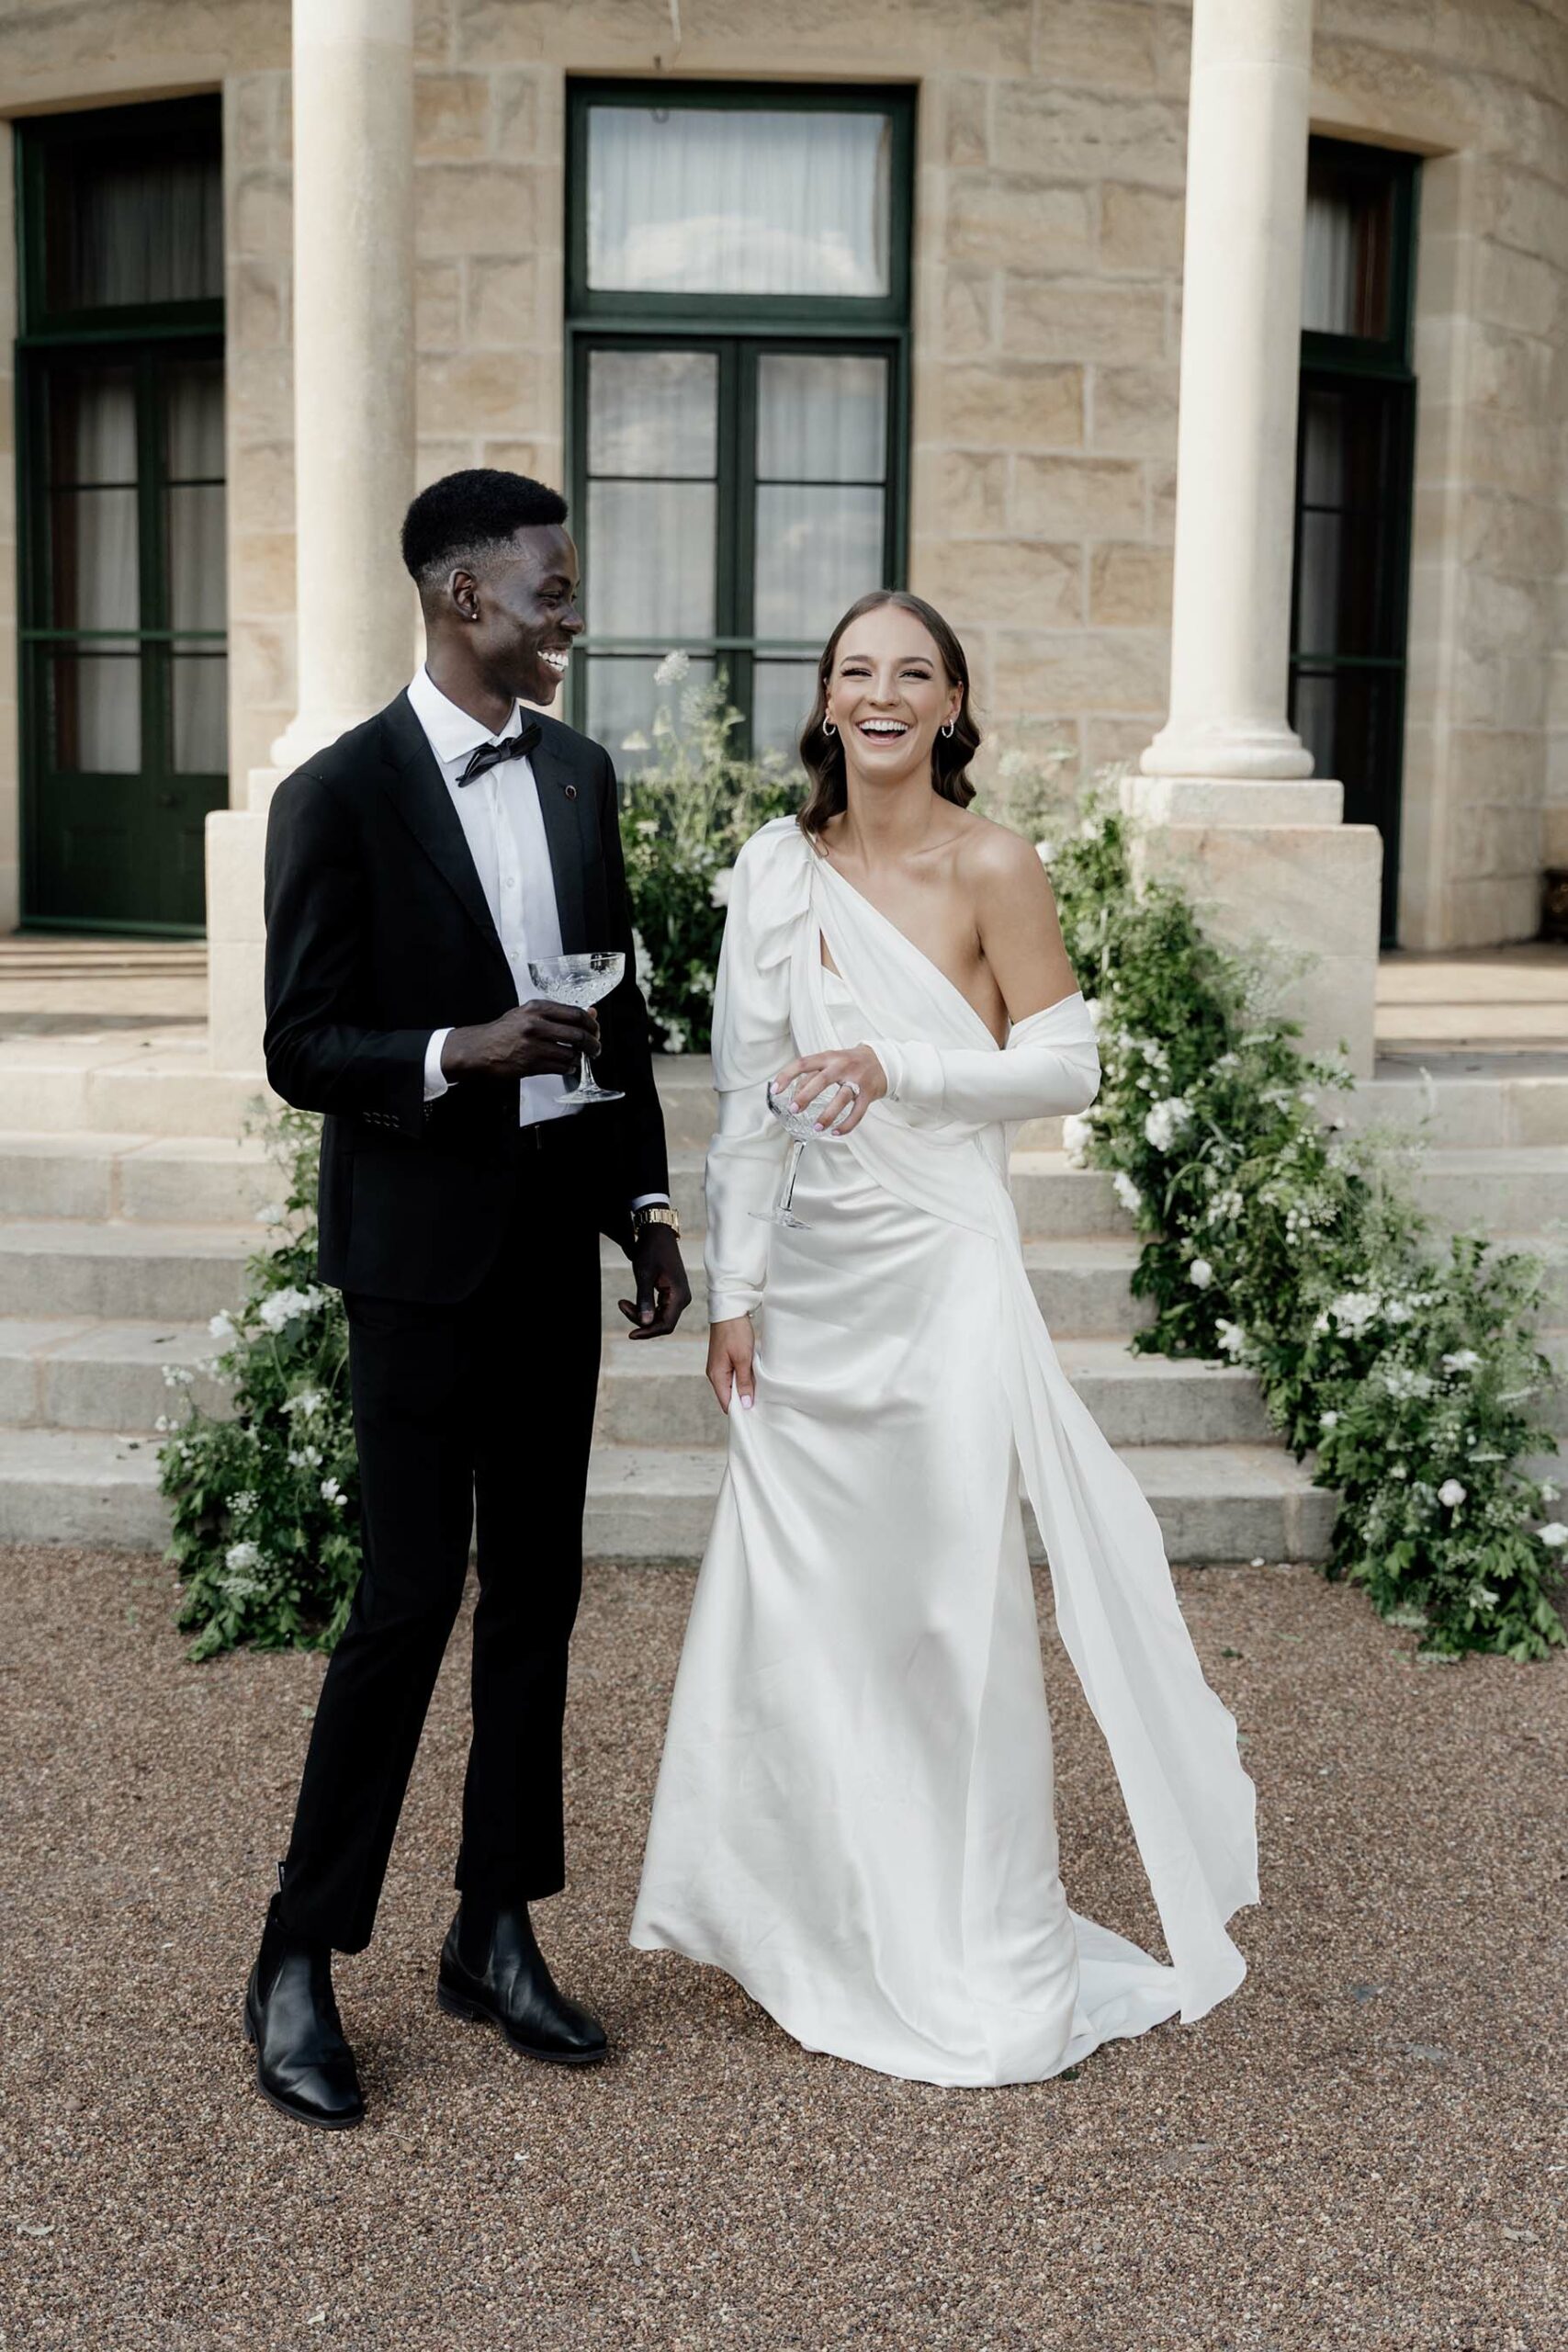 Marry Now, Party Later: A Modern & Fresh Take on The Elopement Trend